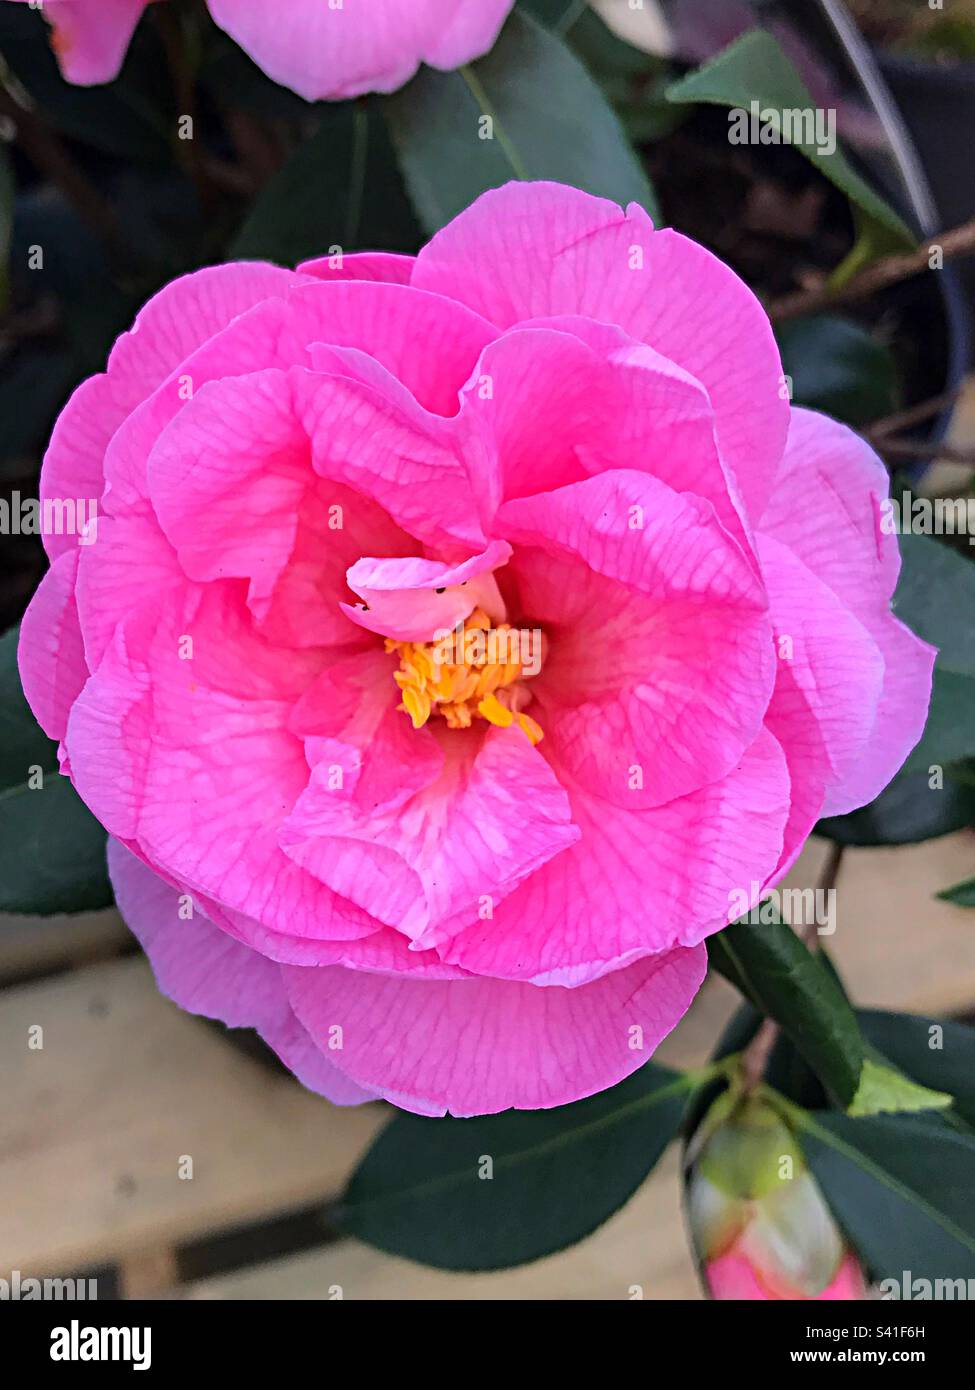 Regarded as one of the finest hybrid camellias, award-winning Camellia Donation' features large, semi-double, orchid-pink flowers. Stock Photo